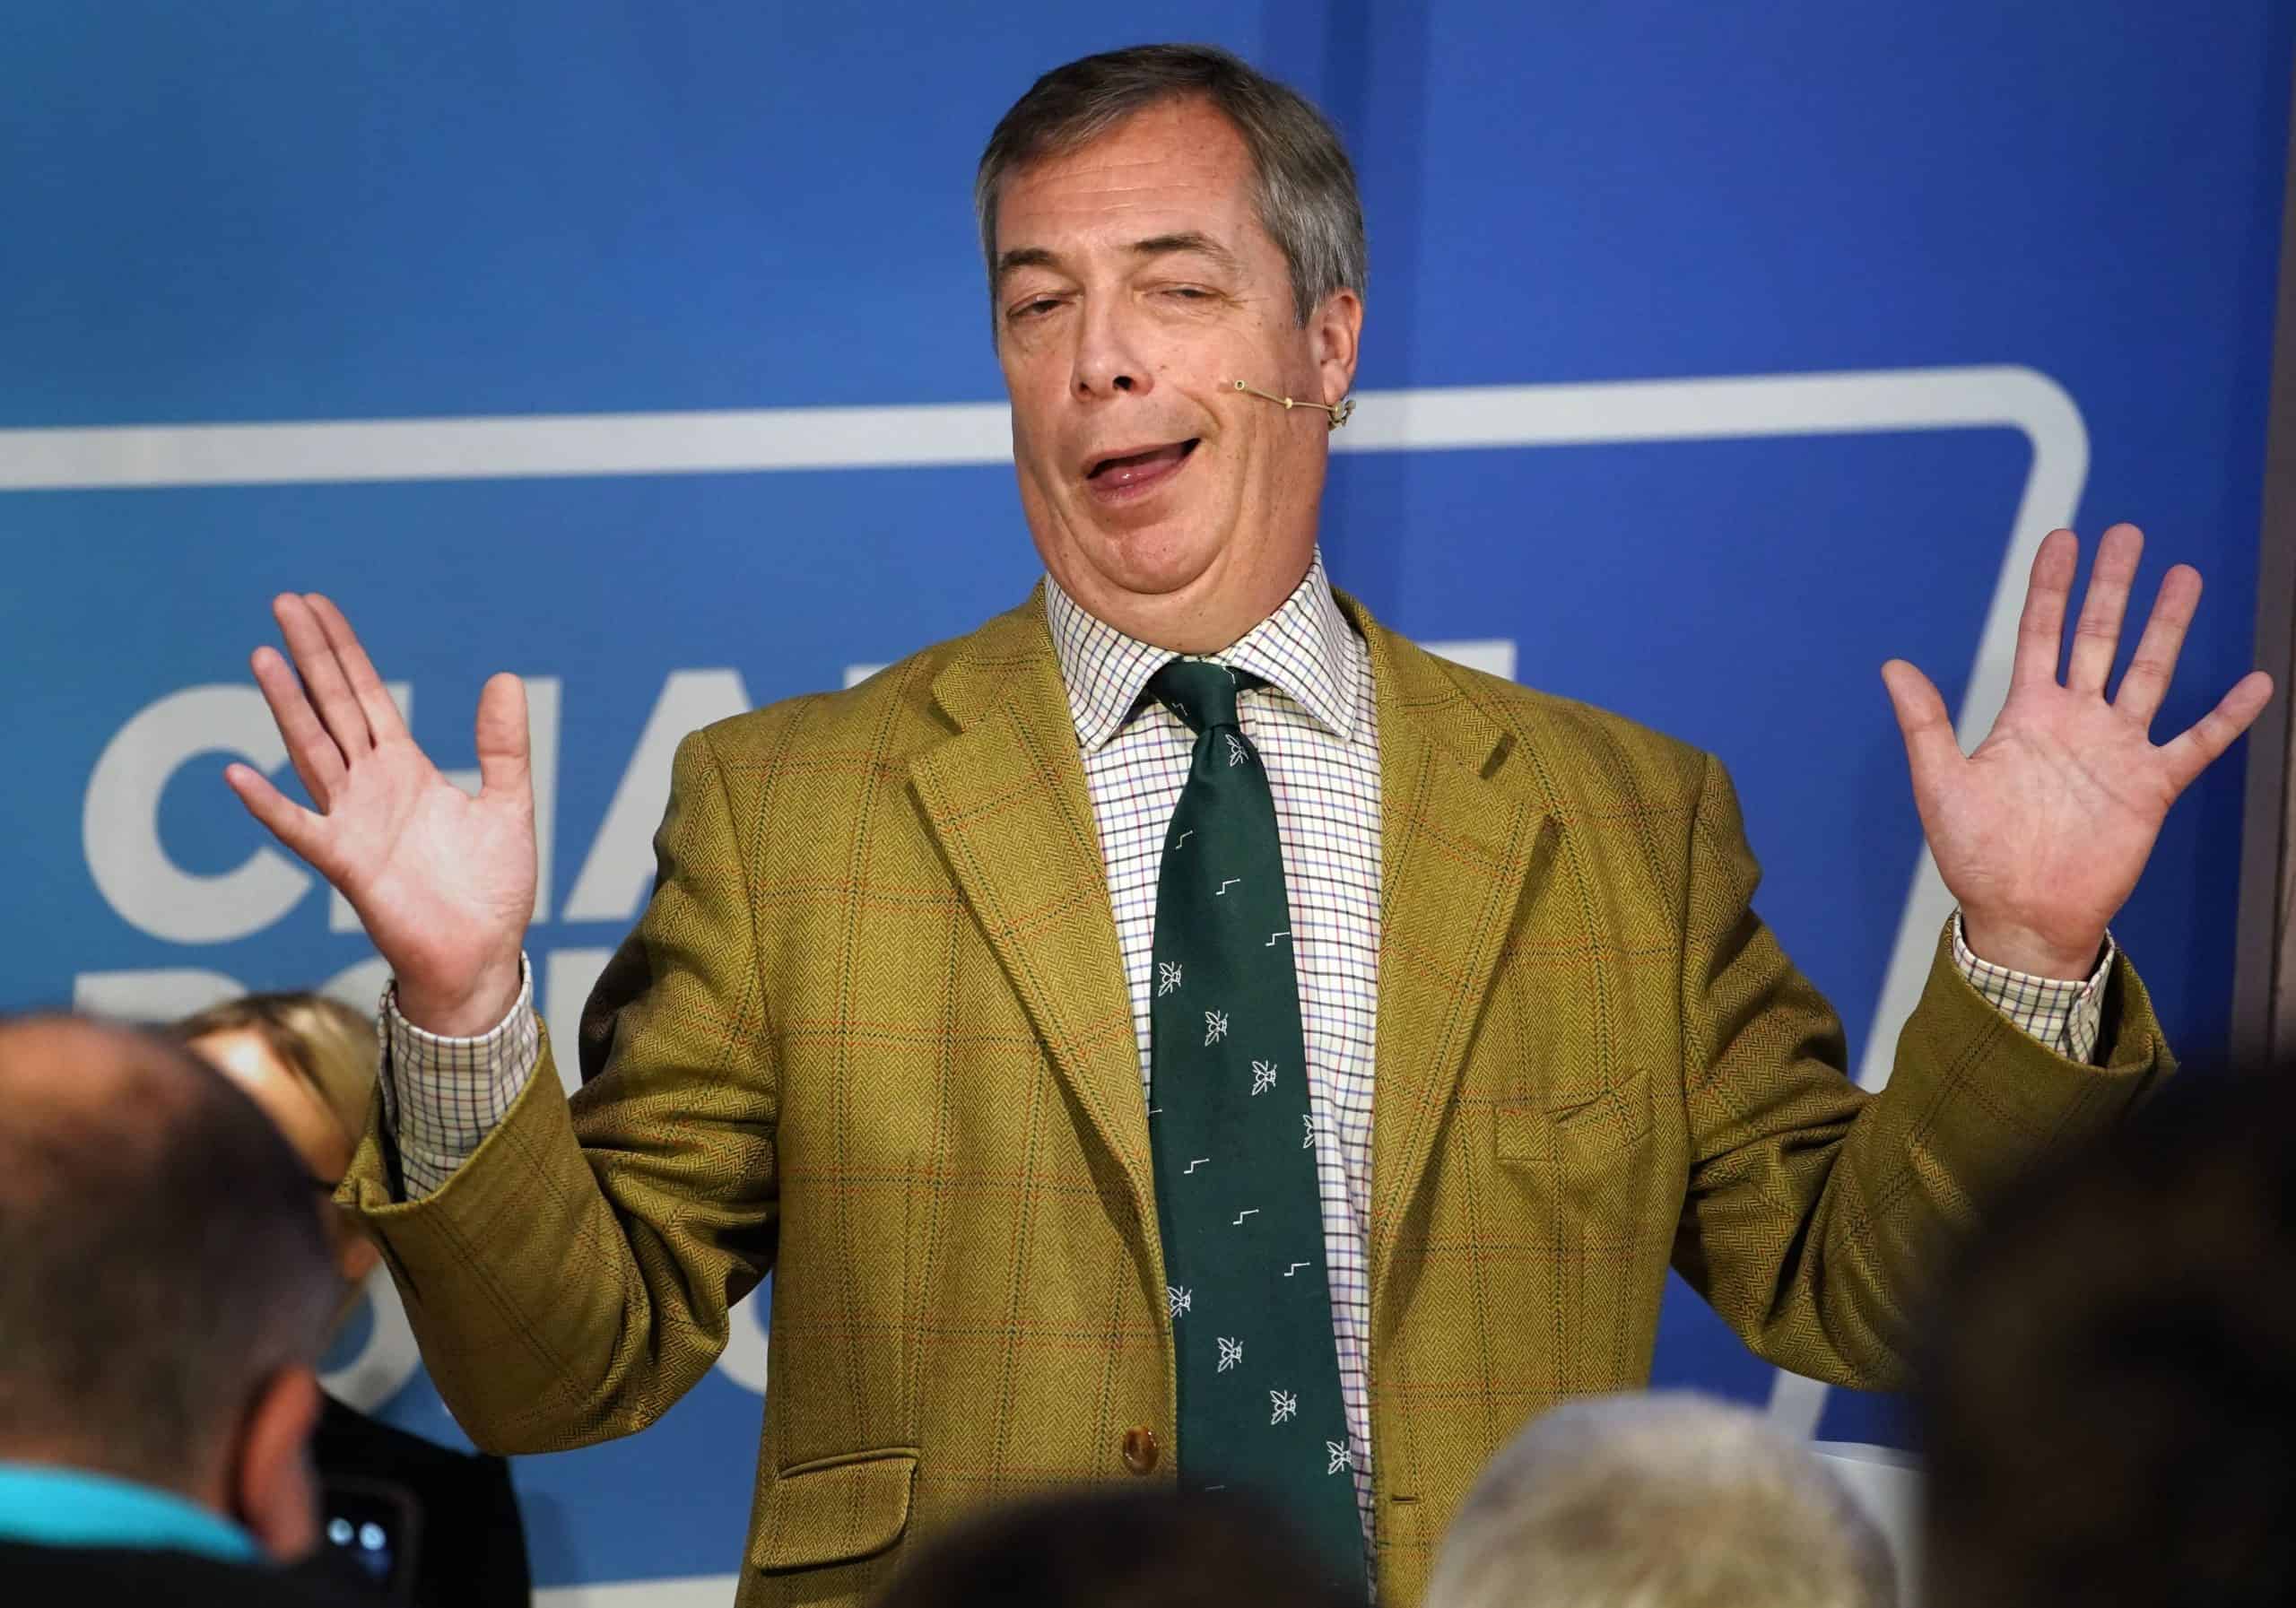 Farage supporters ‘least likely’ to get Covid vaccine among voters